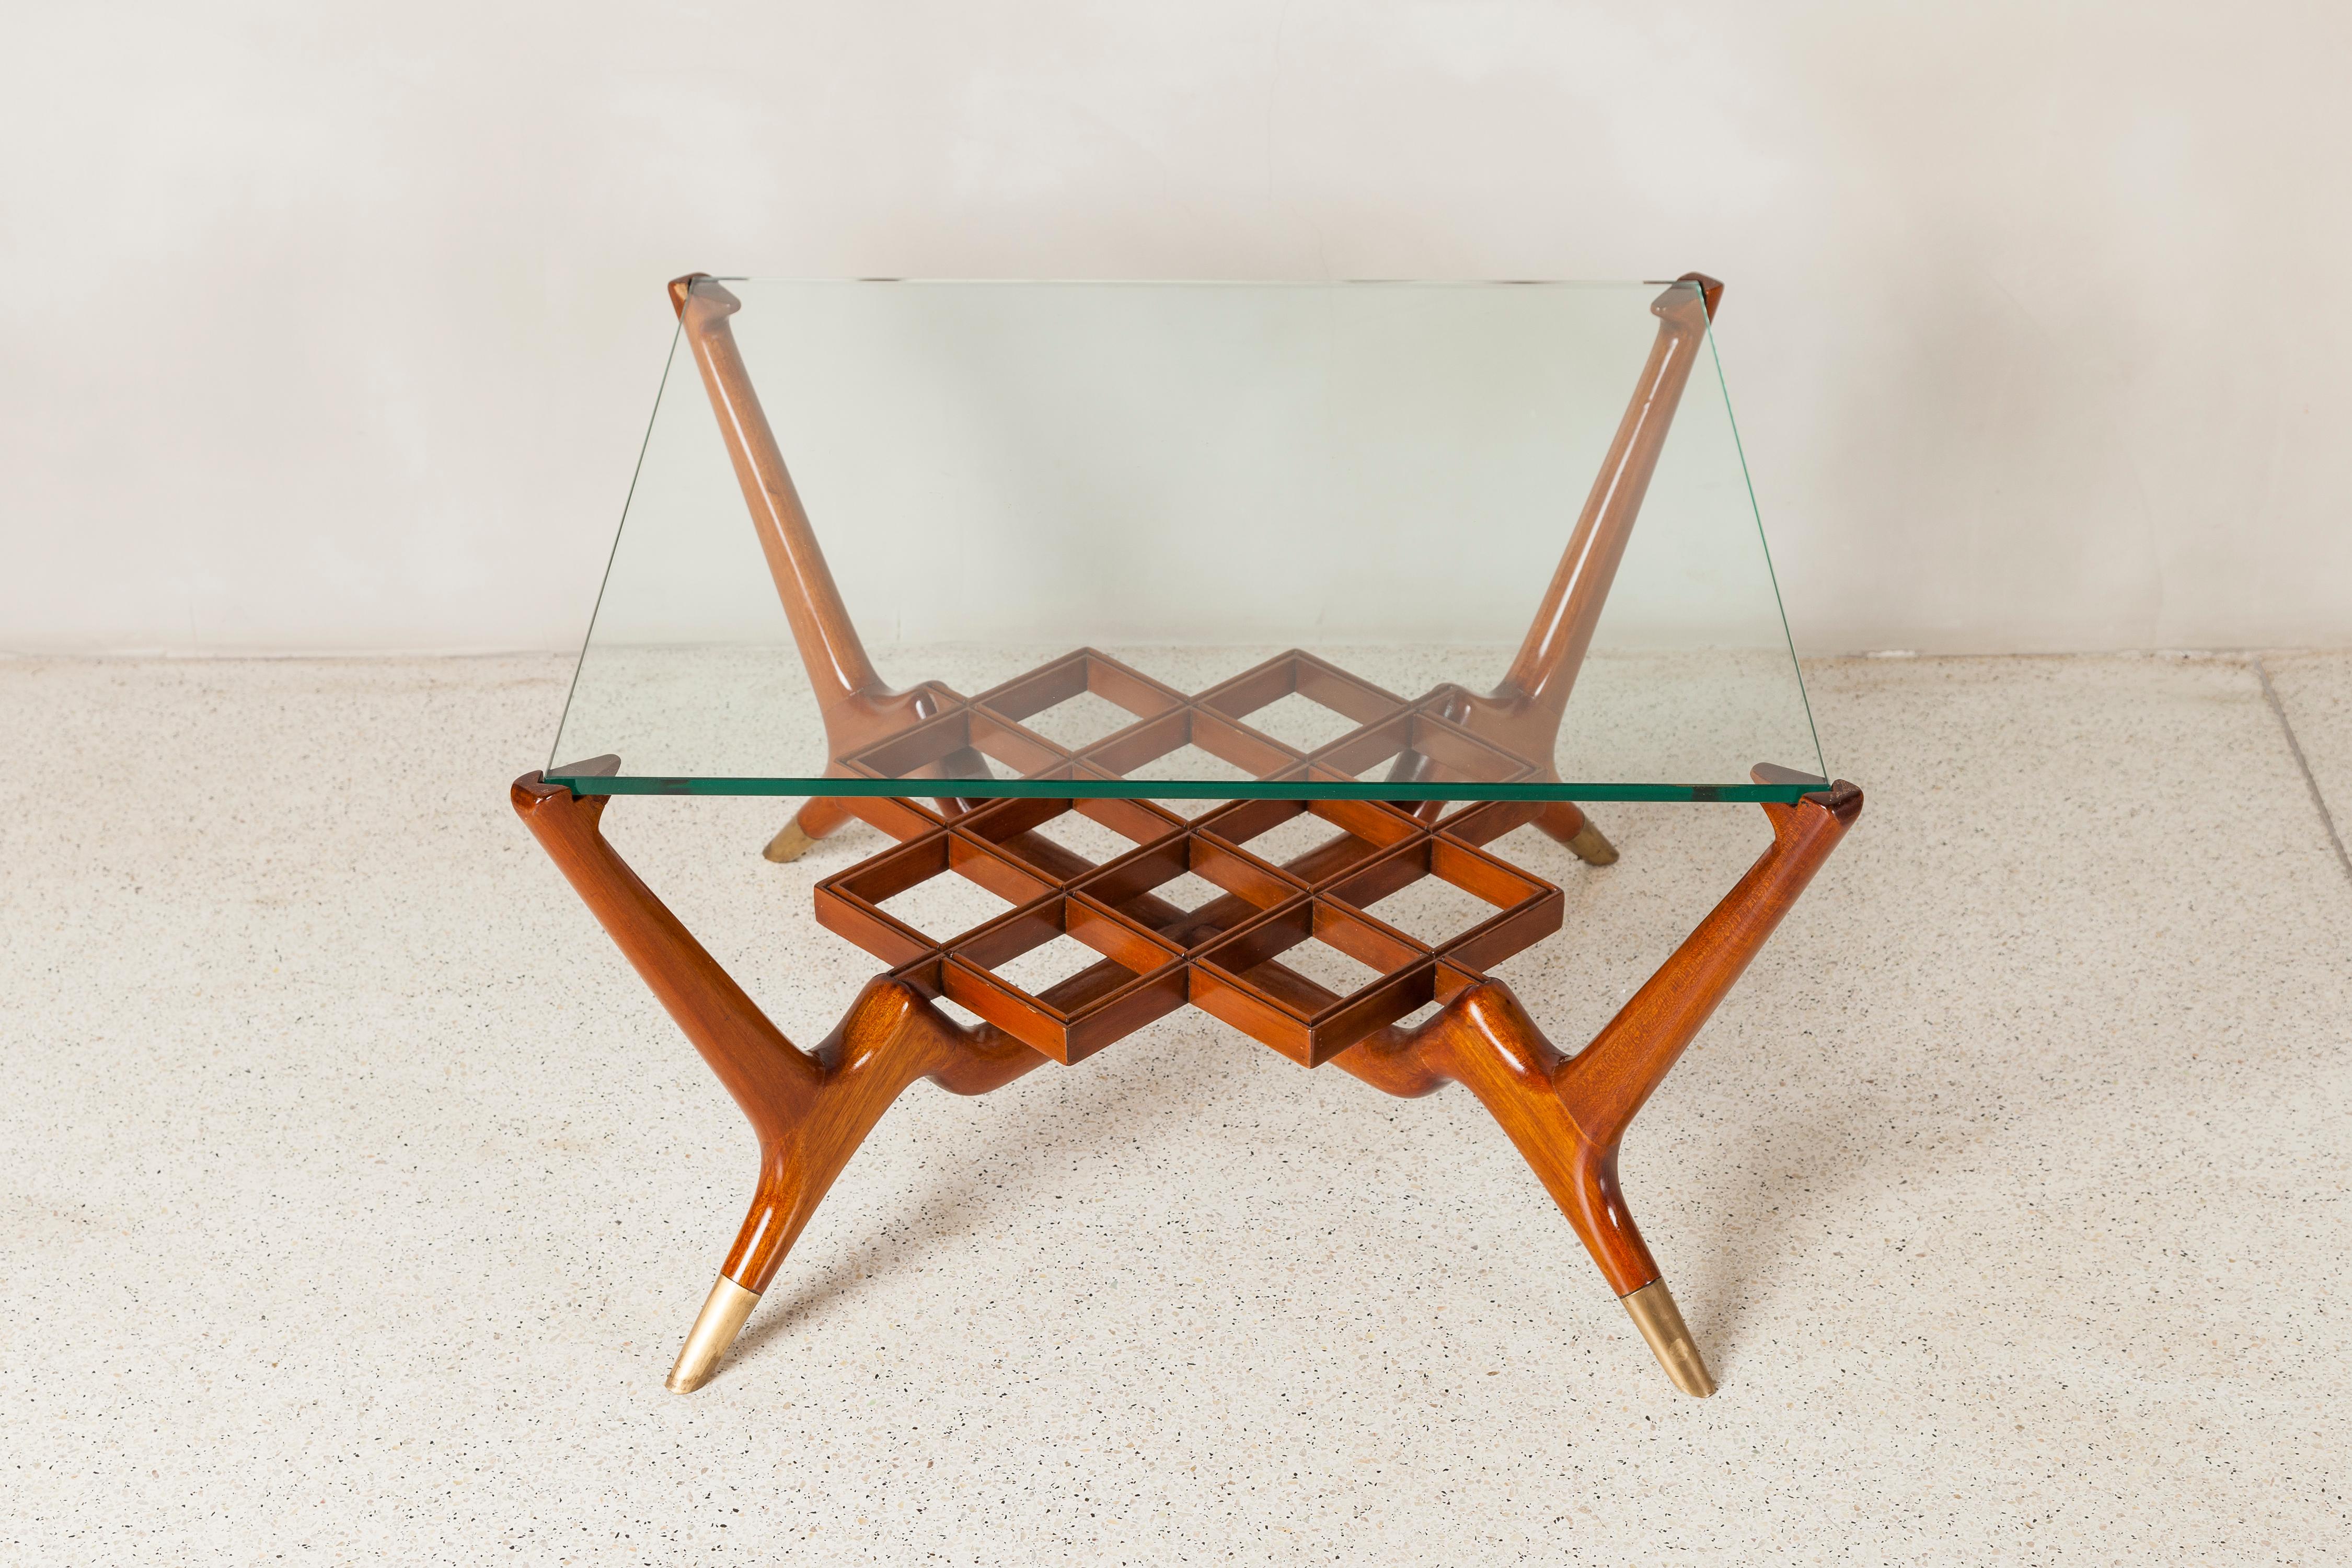 Wood, glass and bronze low table by Englander & Bonta, Argentina, circa 1950.
Glass dimensions: 1 cm height, 60 cm width, 60 cm depth.